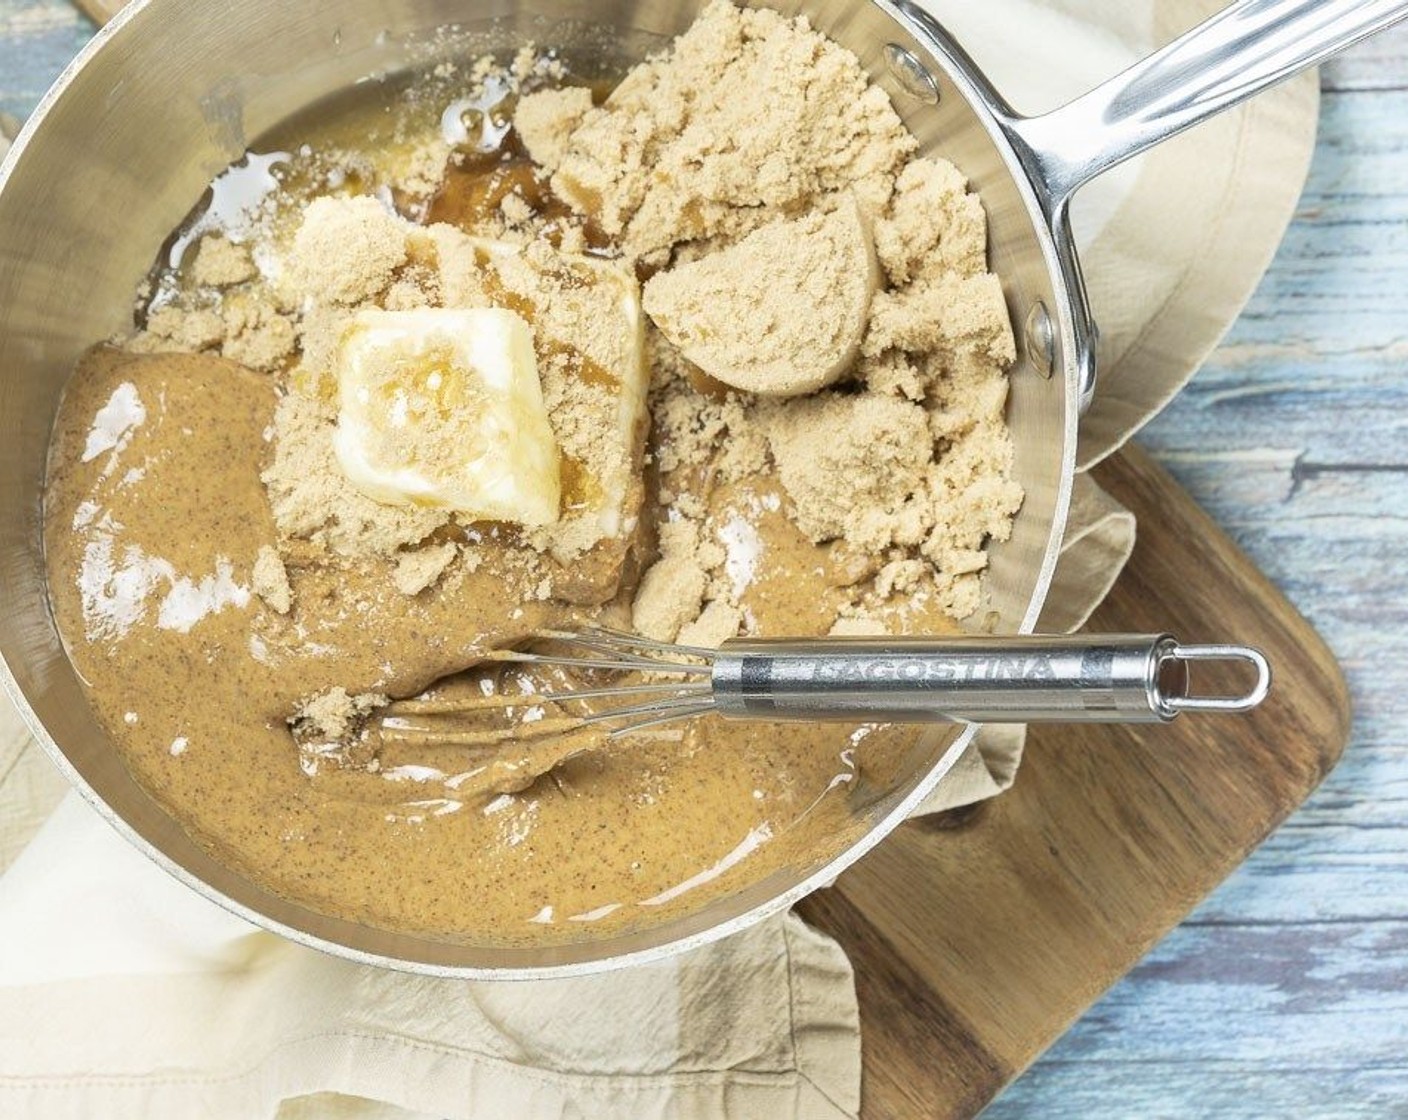 step 1 In a medium size pot over low/medium heat stir together Almond Butter (3/4 cup), Brown Sugar (3/4 cup), Unsalted Butter (1/2 cup), Honey (1/4 cup) and Coconut Oil (2 Tbsp) until smooth and melted.